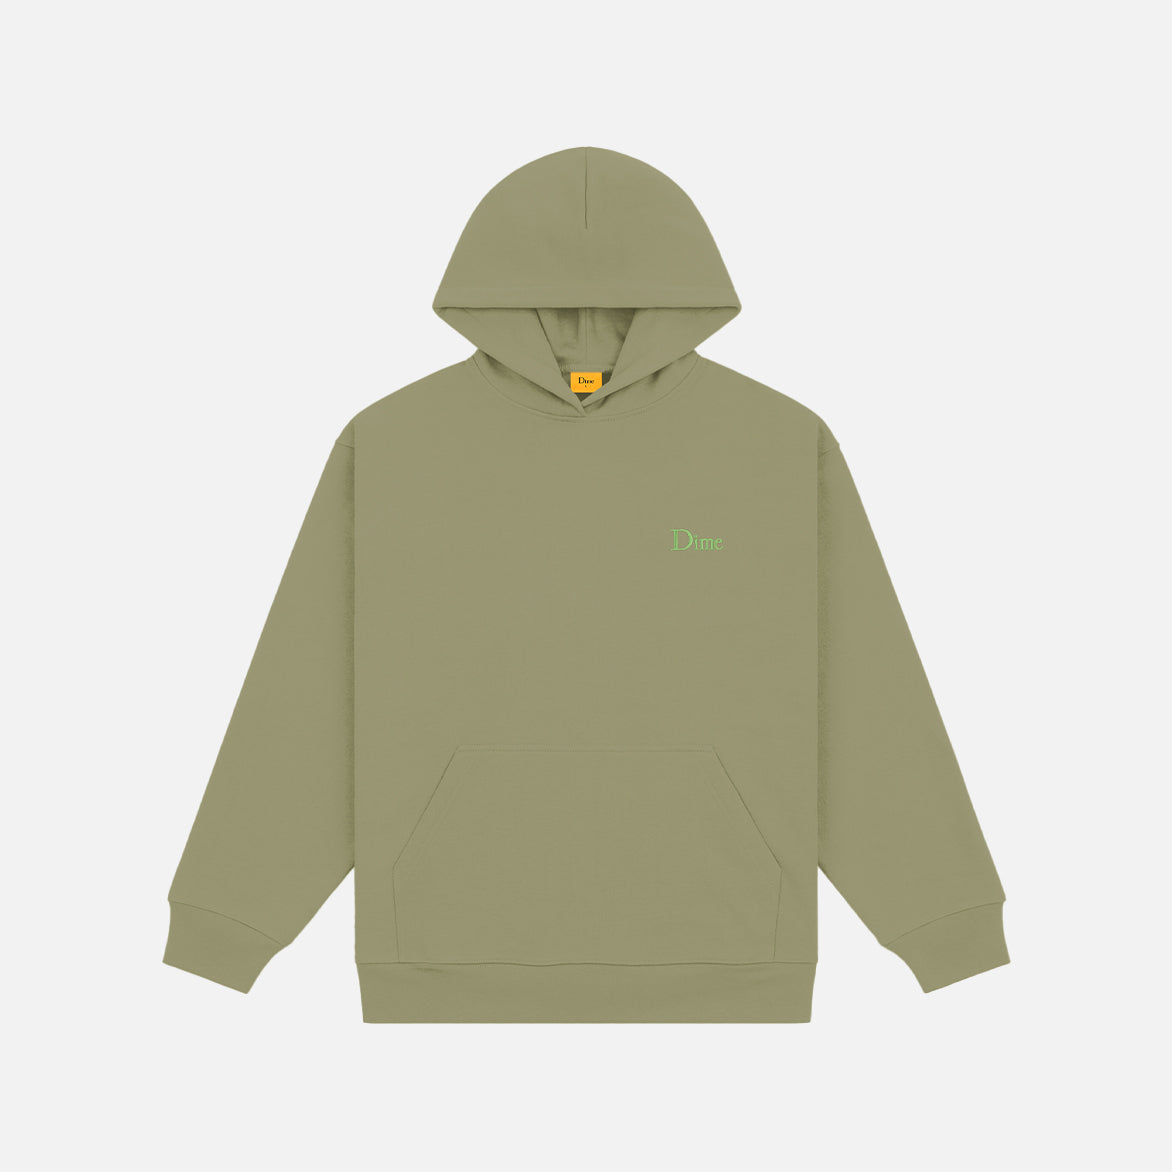 CLASSIC SMALL LOGO HOODIE - ARMY GREEN